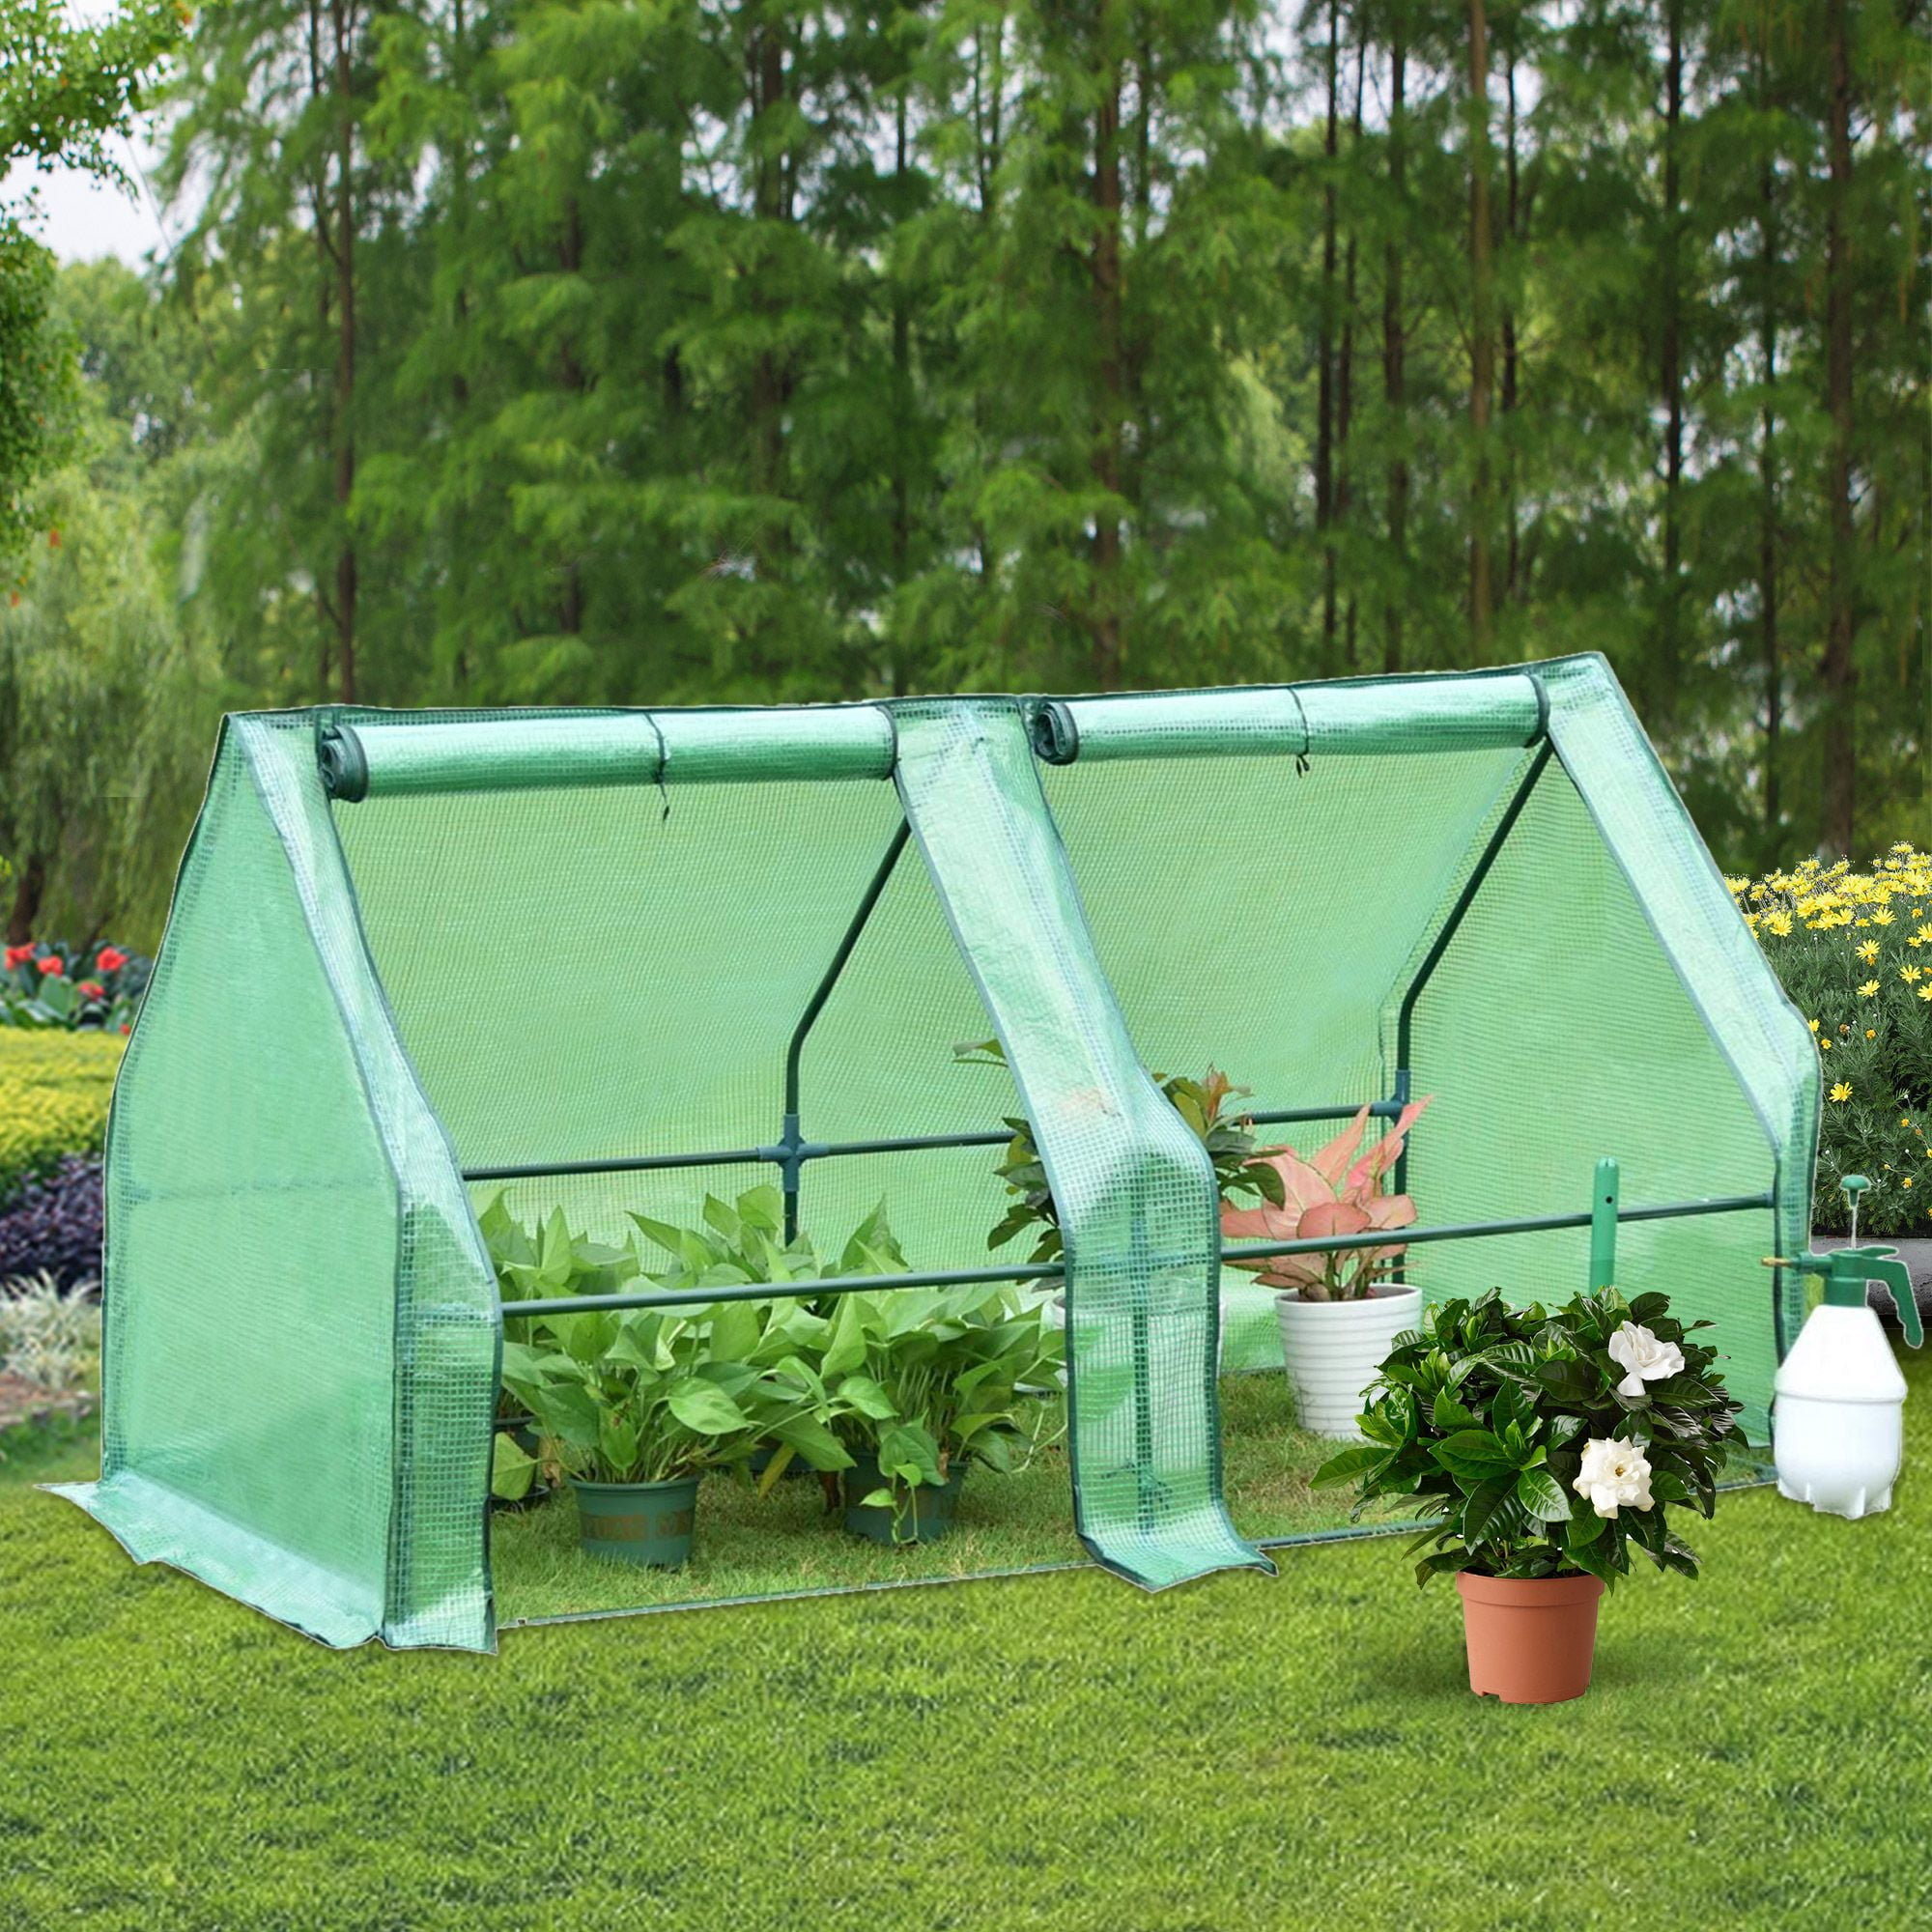 New Greenhouse Polly Tunnel Patio Garden Outdoor  UV protected growing plants 